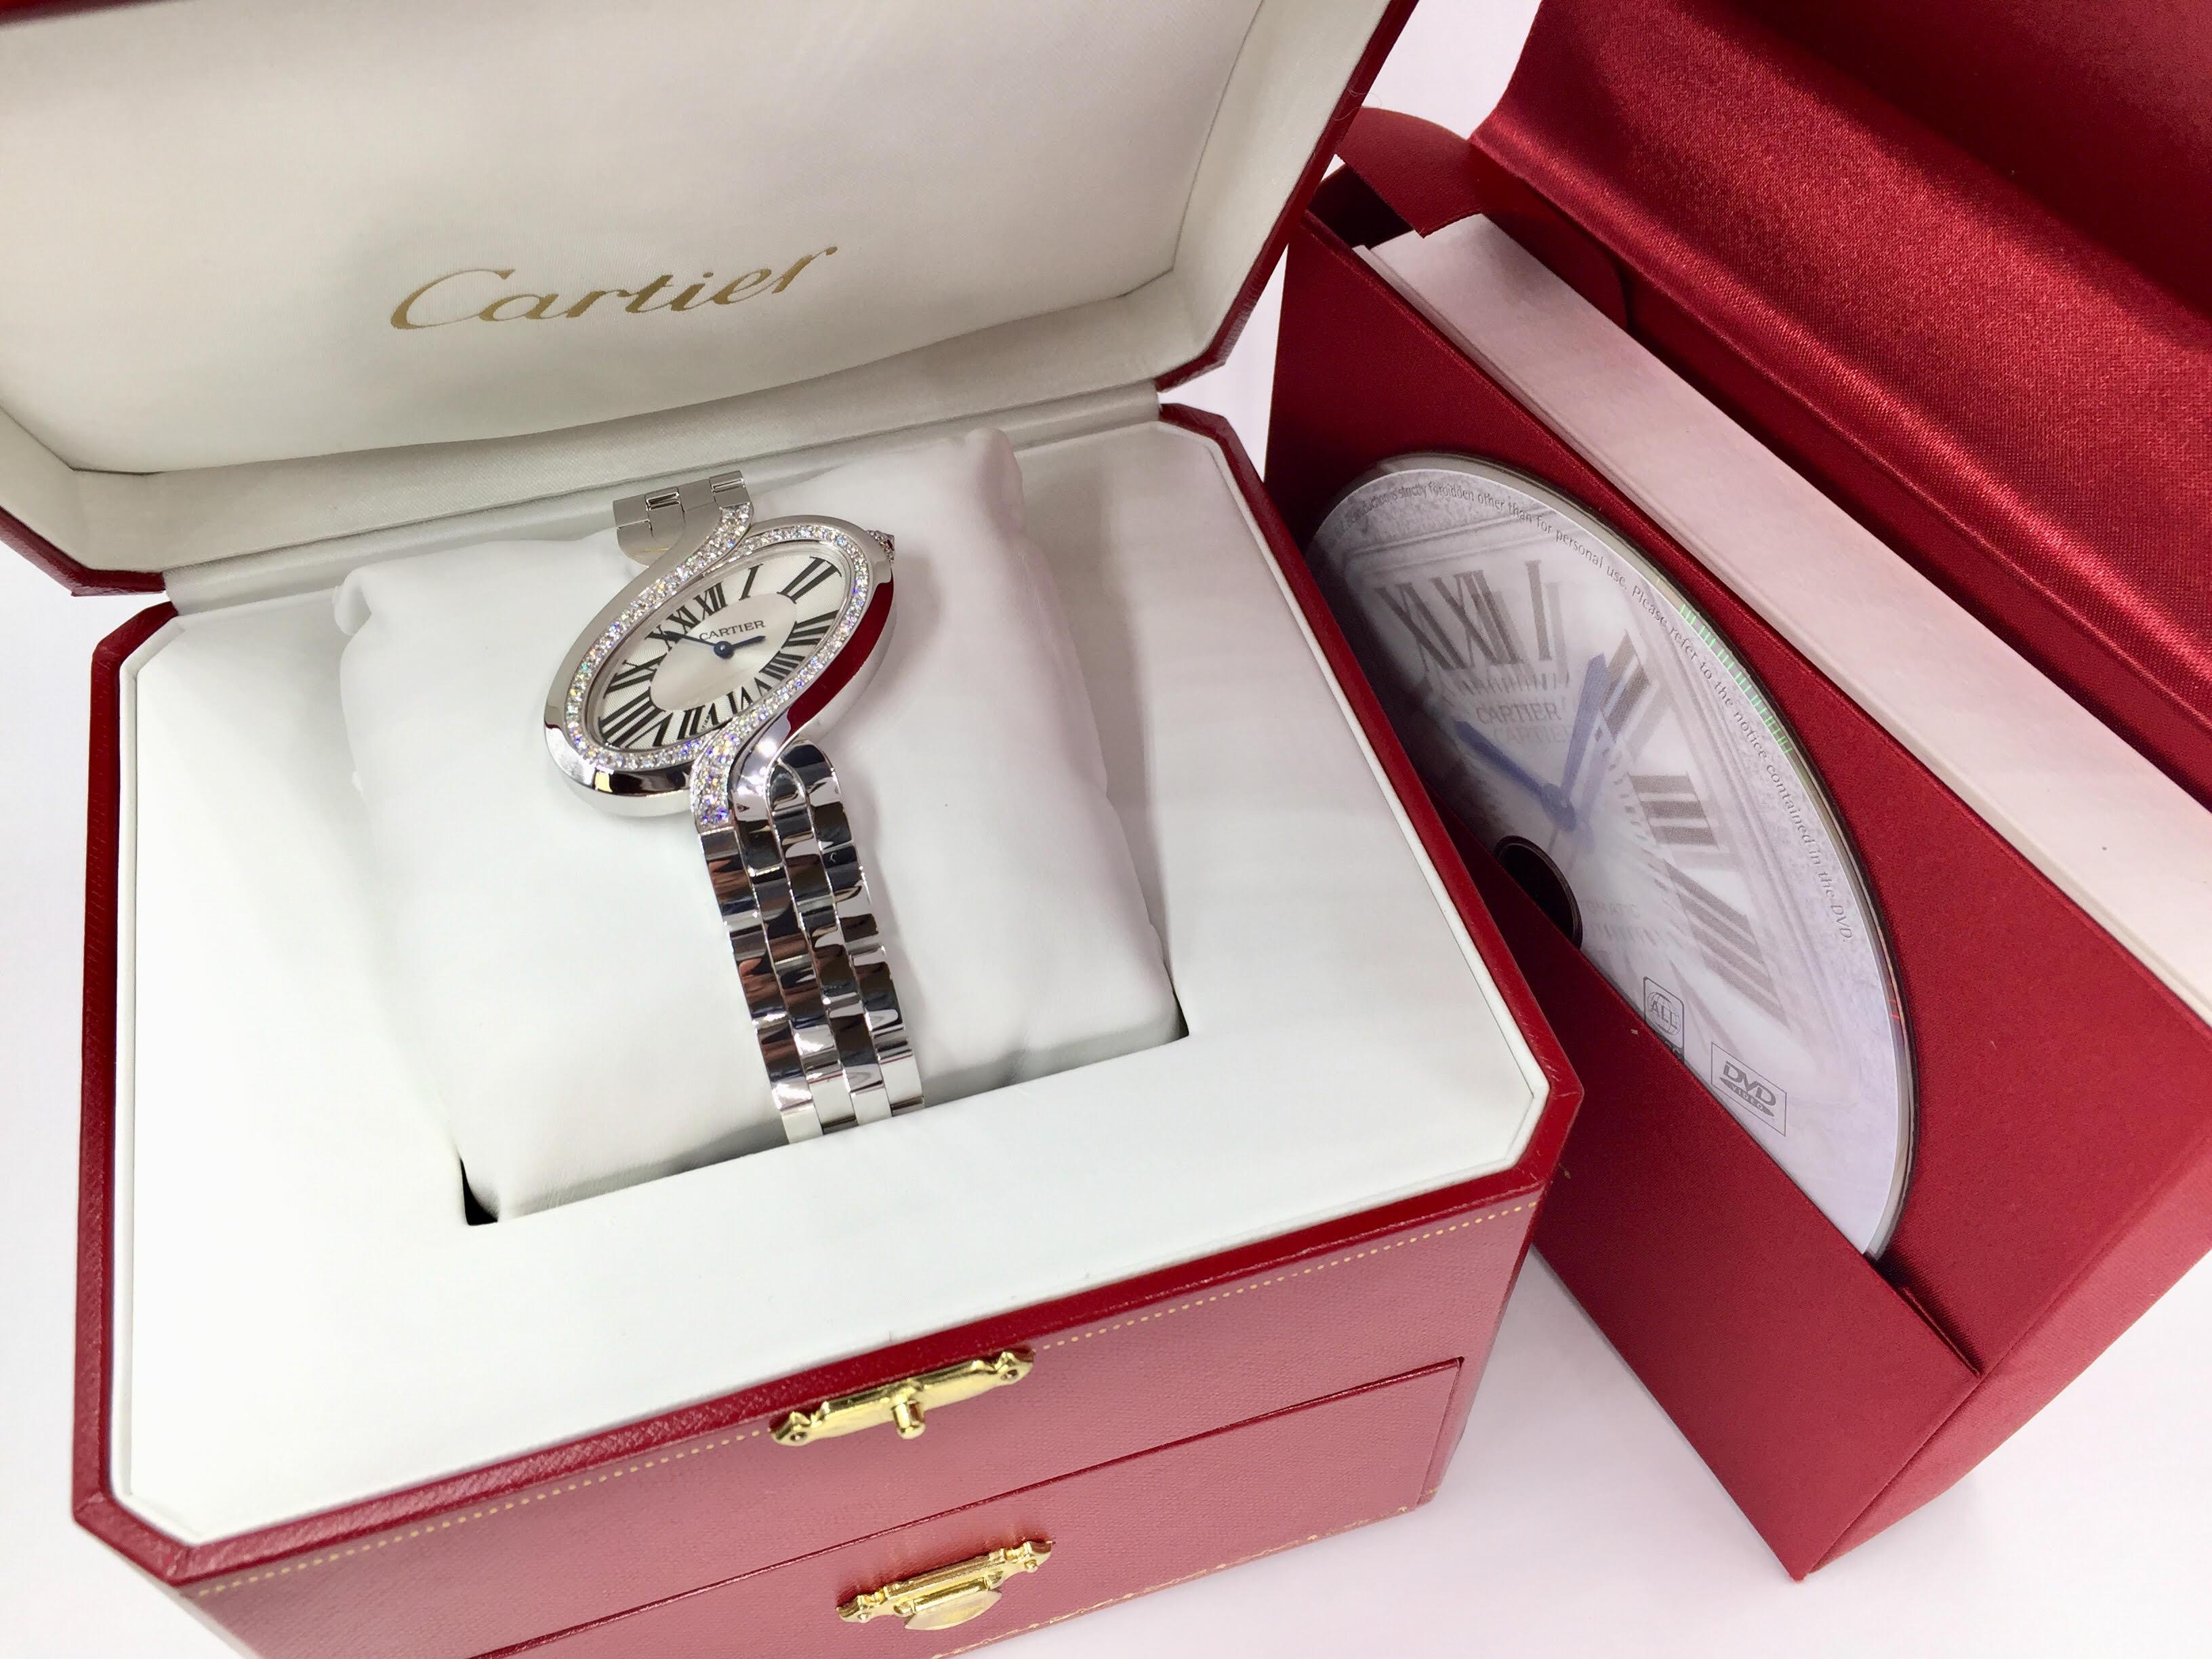 Cartier Delices Large Watch 18 Karat White Gold WG800007 For Sale 3